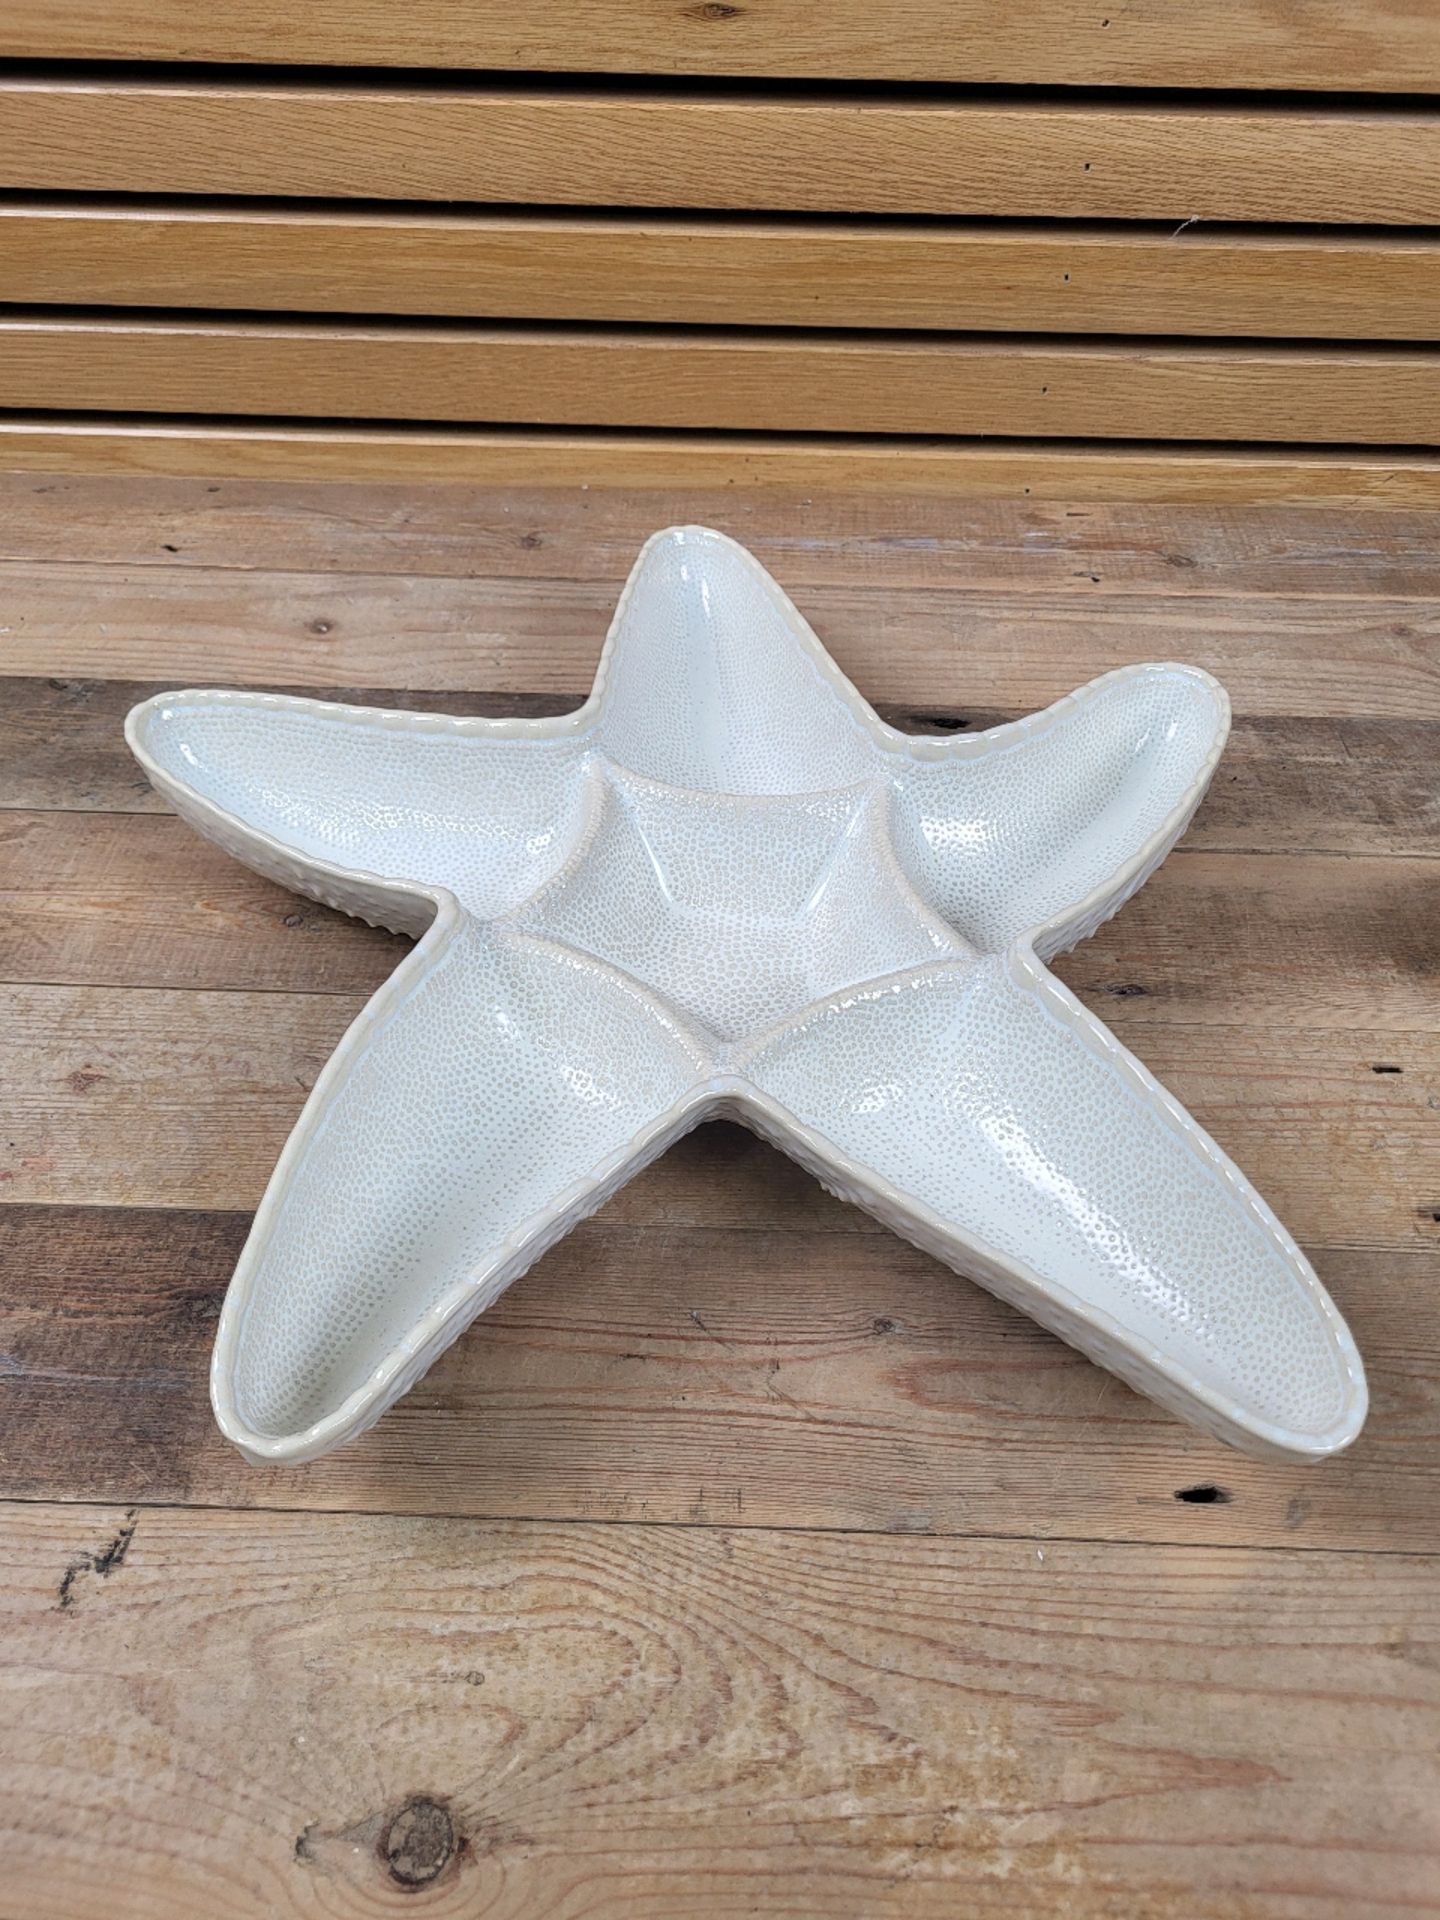 Pair of Starfish Serving Platters - Image 2 of 4